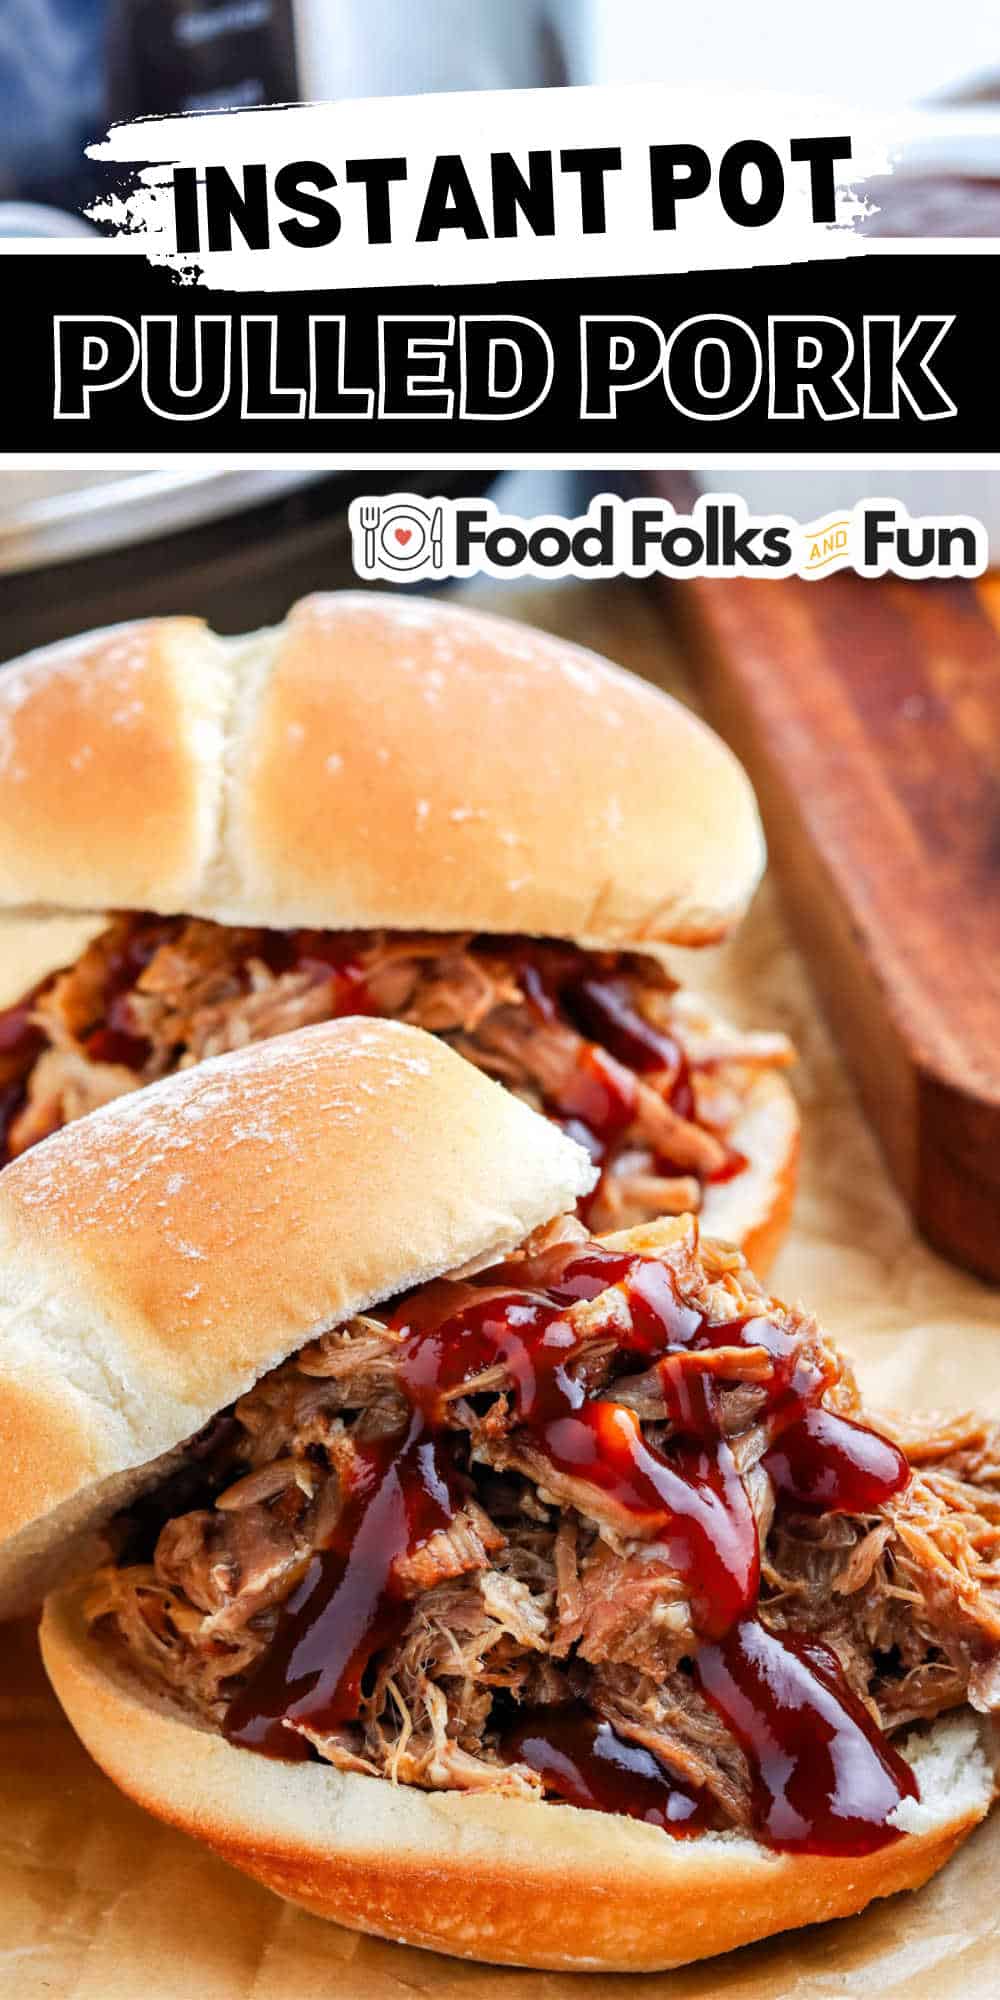 Tender and flavorful pulled pork made effortlessly in the Instant Pot. Savory spices and juicy meat create the ultimate BBQ sandwich or taco filling. via @foodfolksandfun